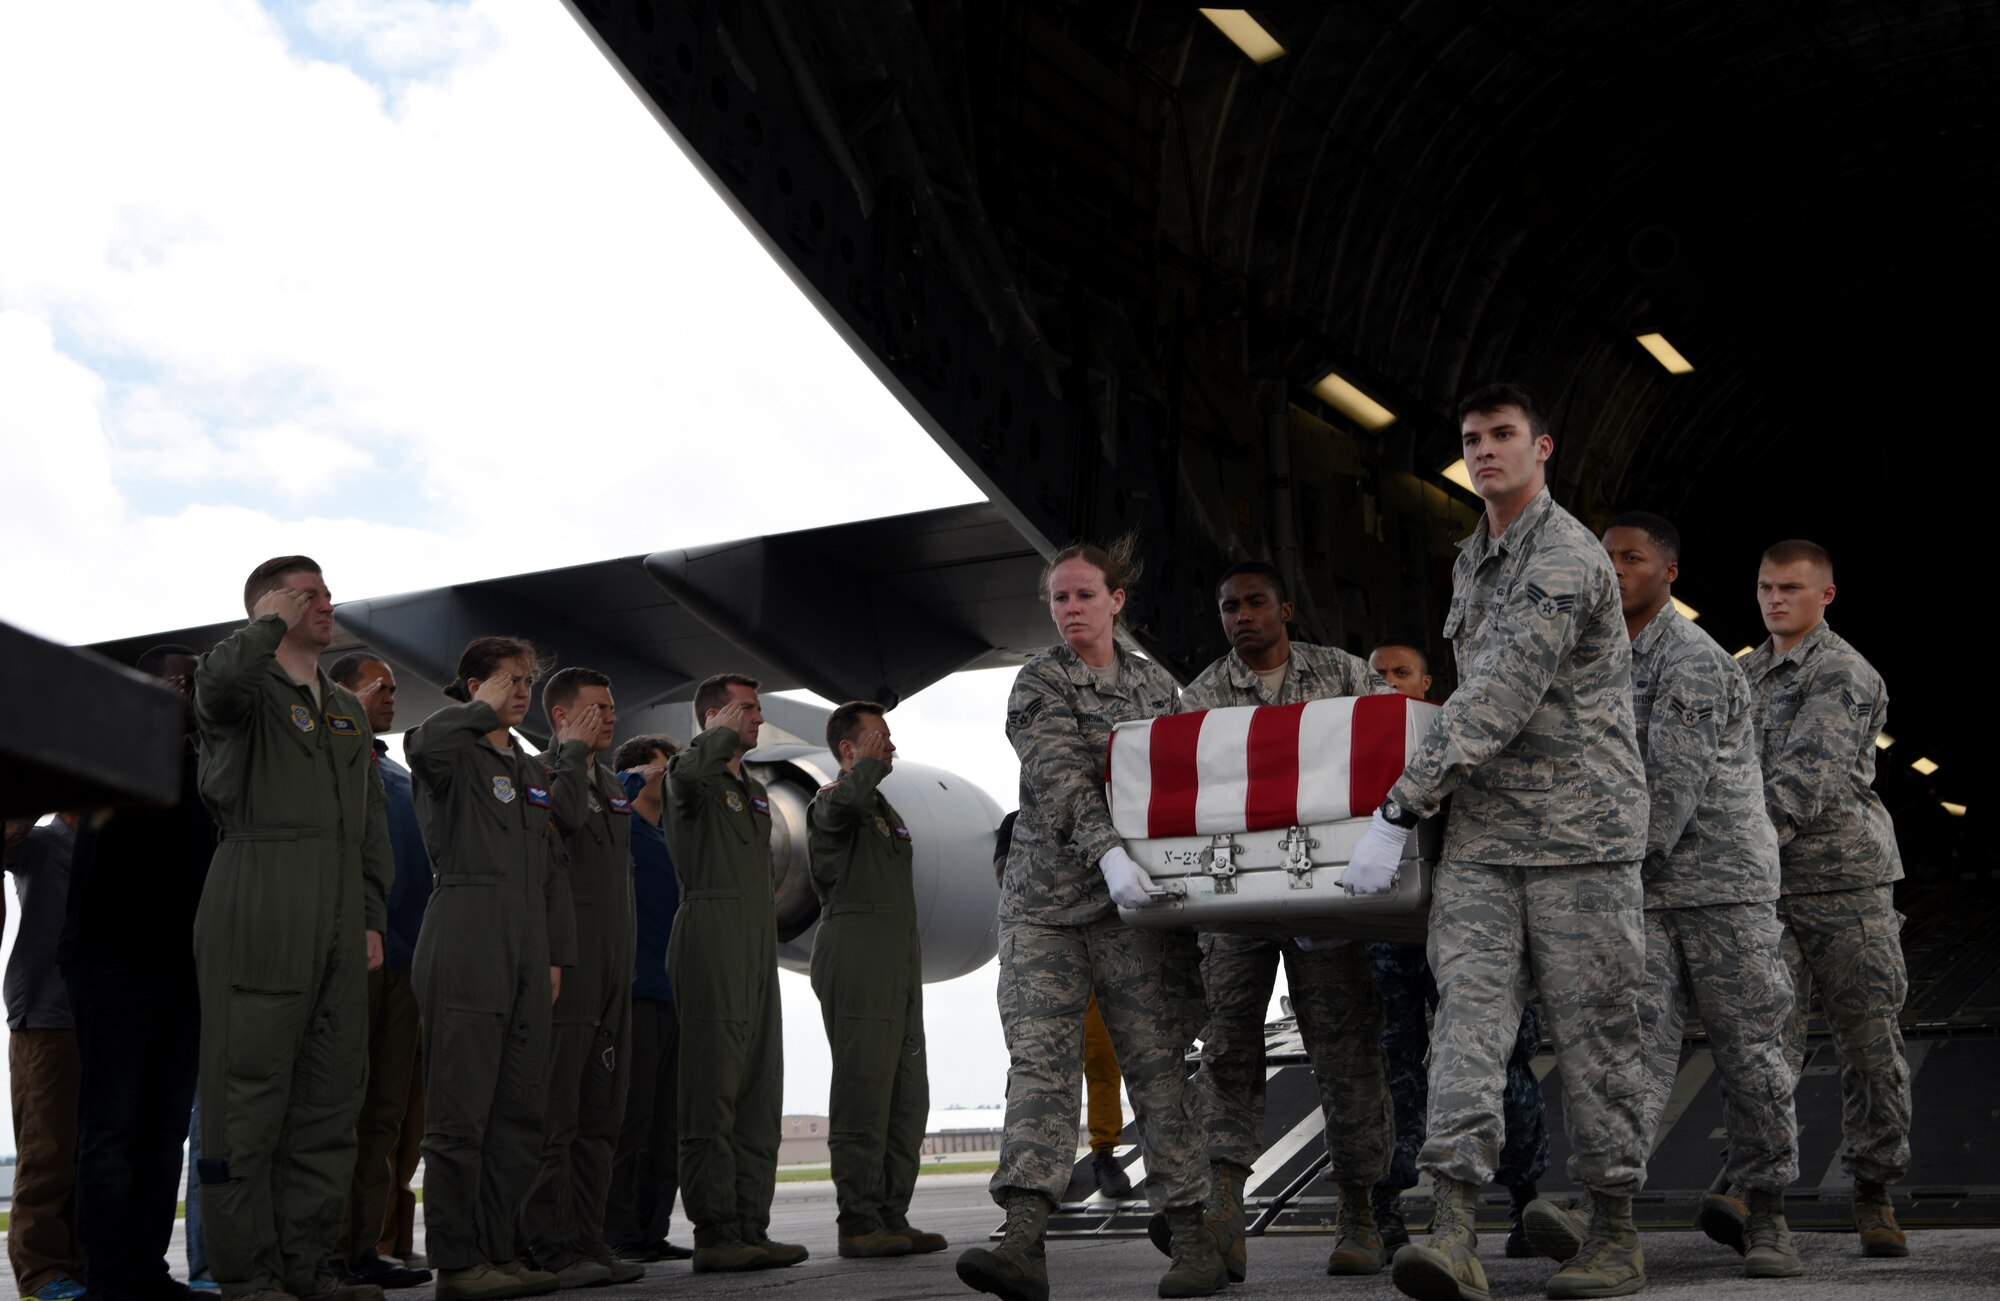 The aircrew salute the remains of WWII heroes as they pass during a repatriation ceremony Sept. 14, 2018, at Offutt Air Force Base, Nebraska. Aircrew from Joint Base Charleston, S.C. was tasked to deliver the remains due to its rapid mobility capabilities